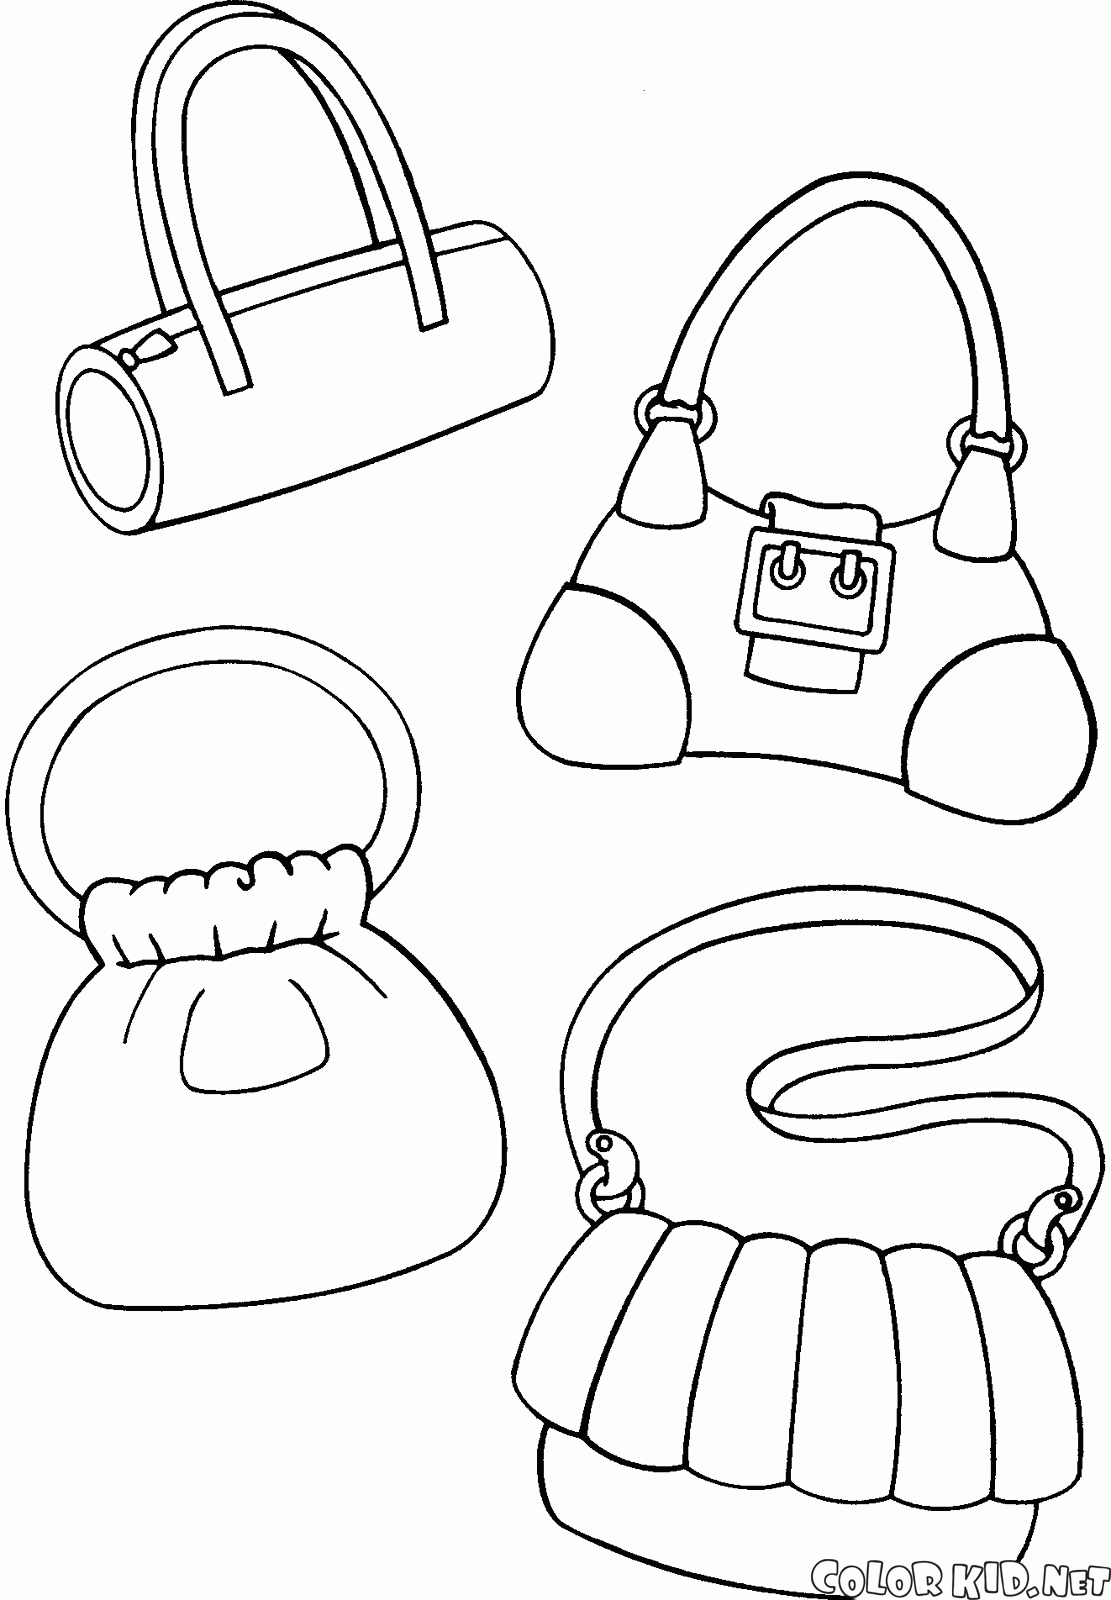 accessory coloring pages - photo #30